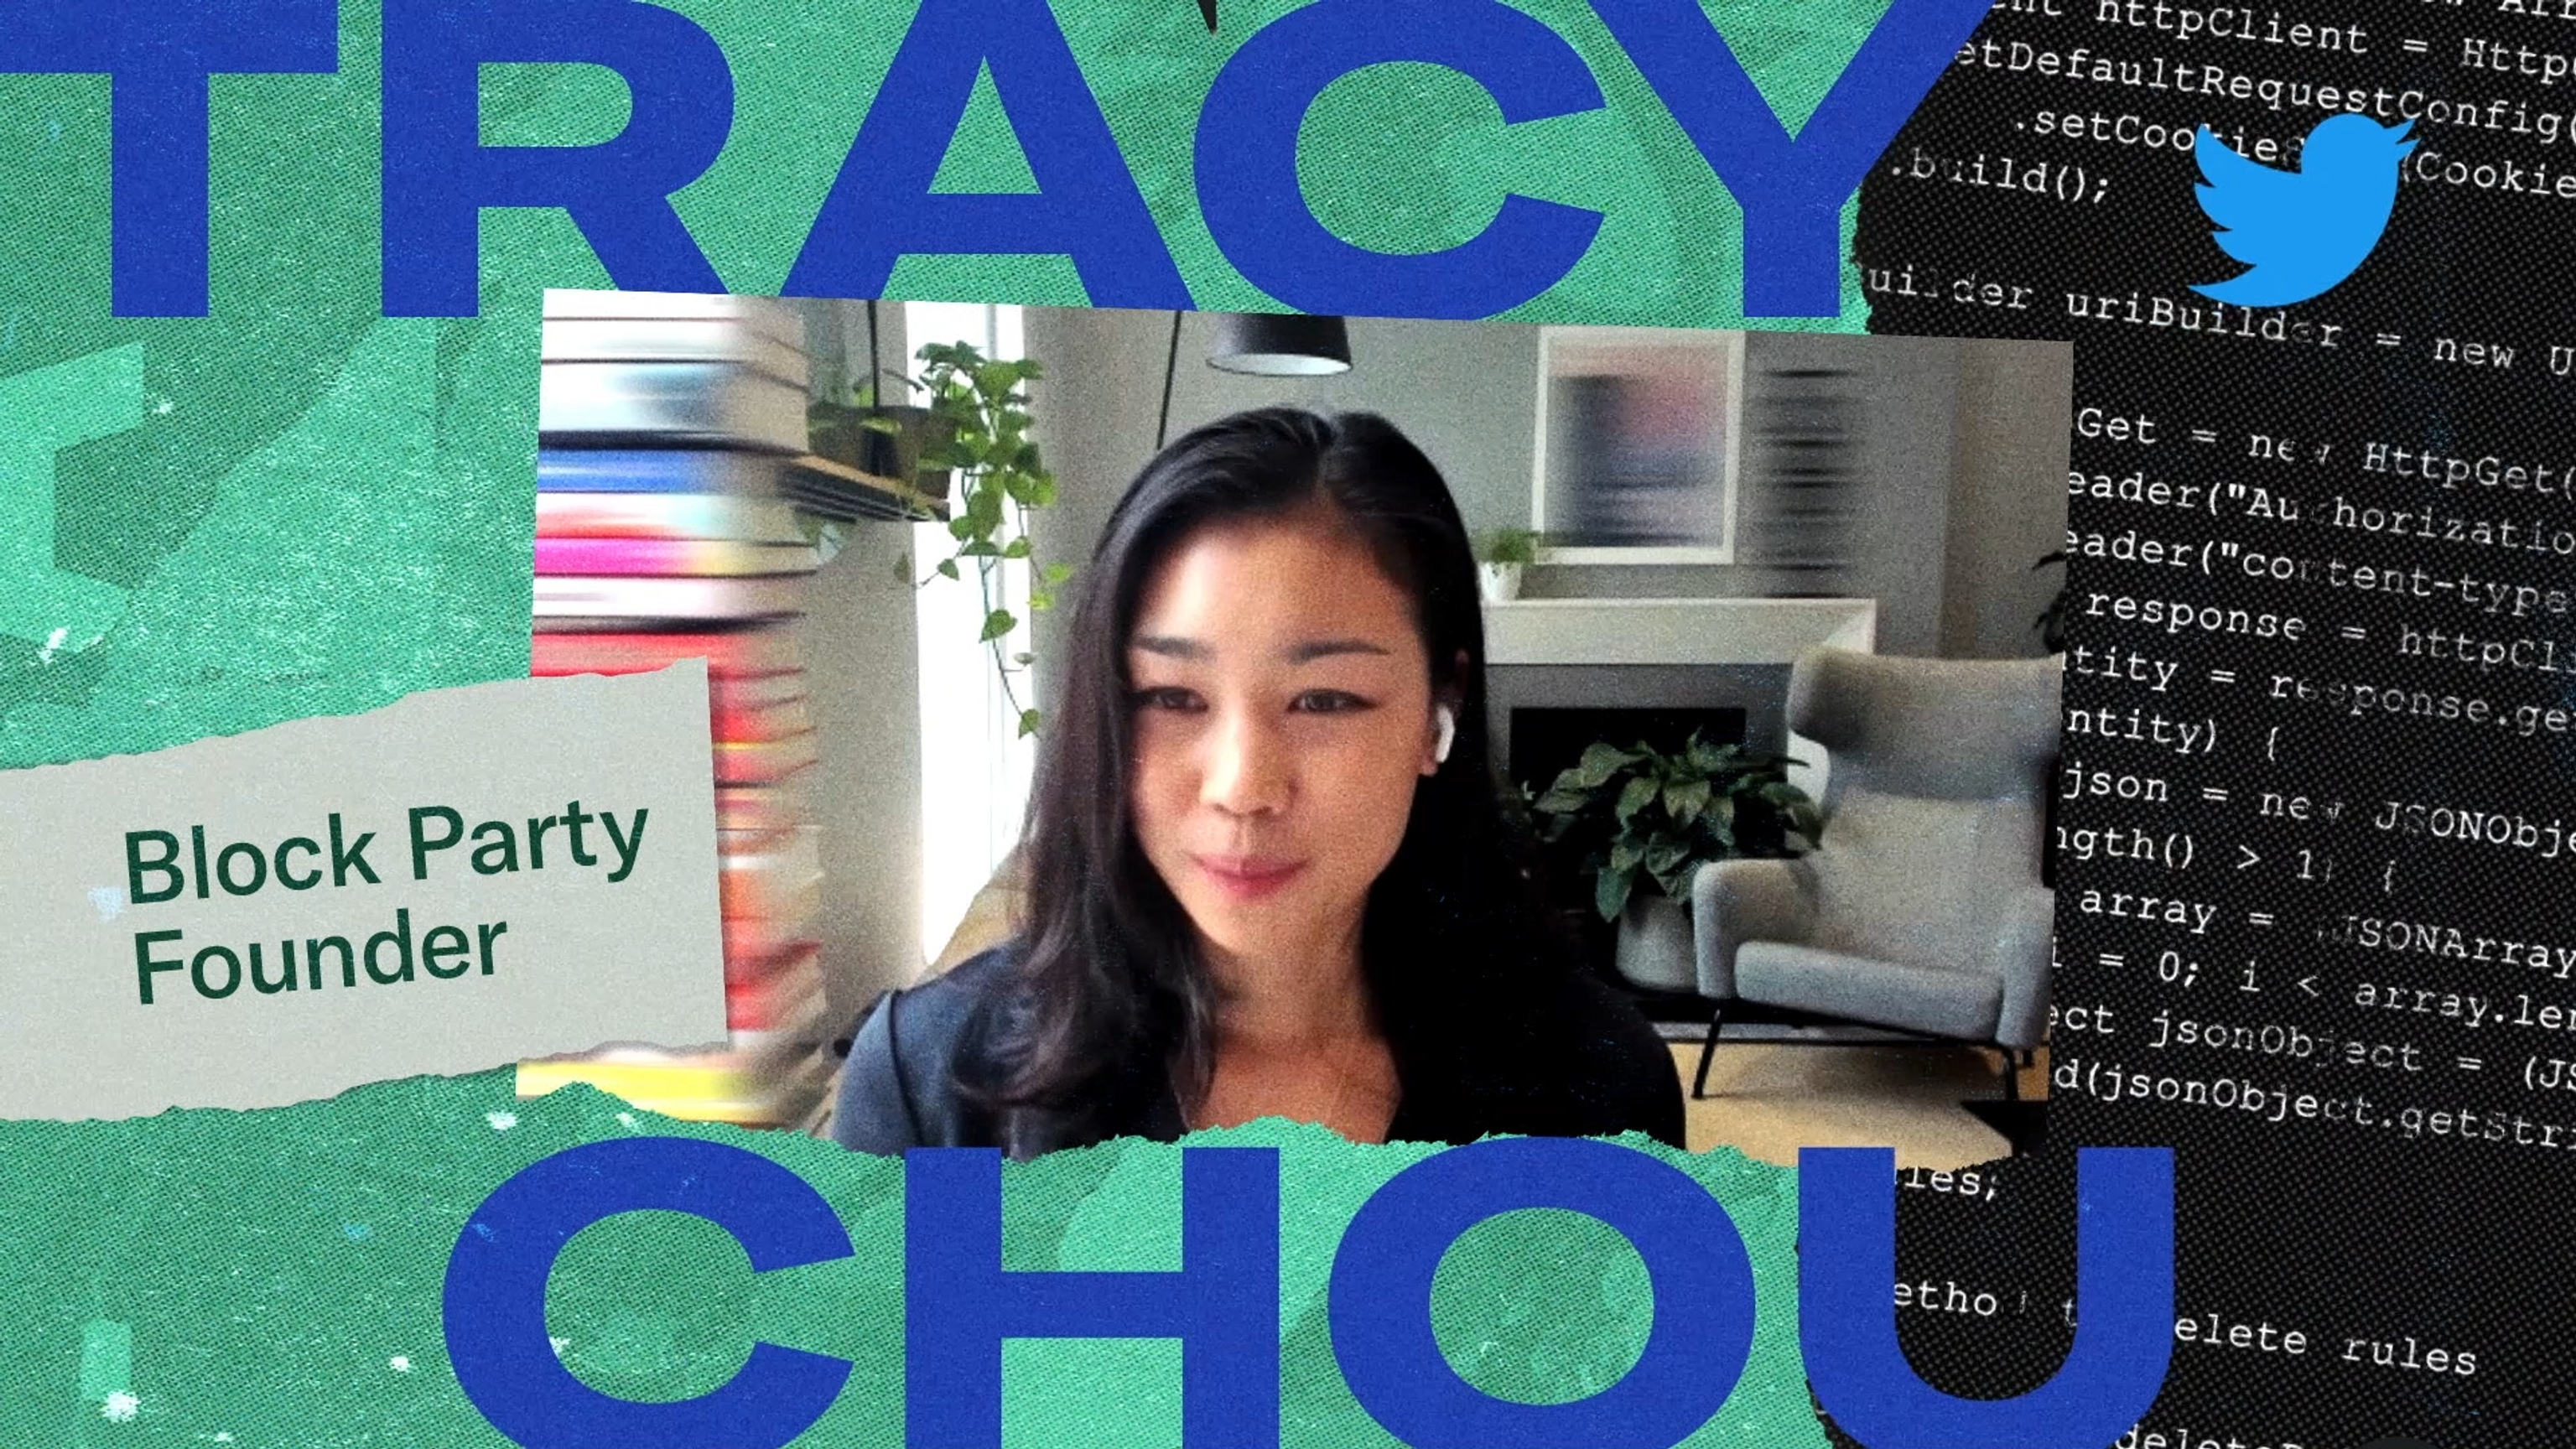 Twitter - Behind the Code - Tracy Chou